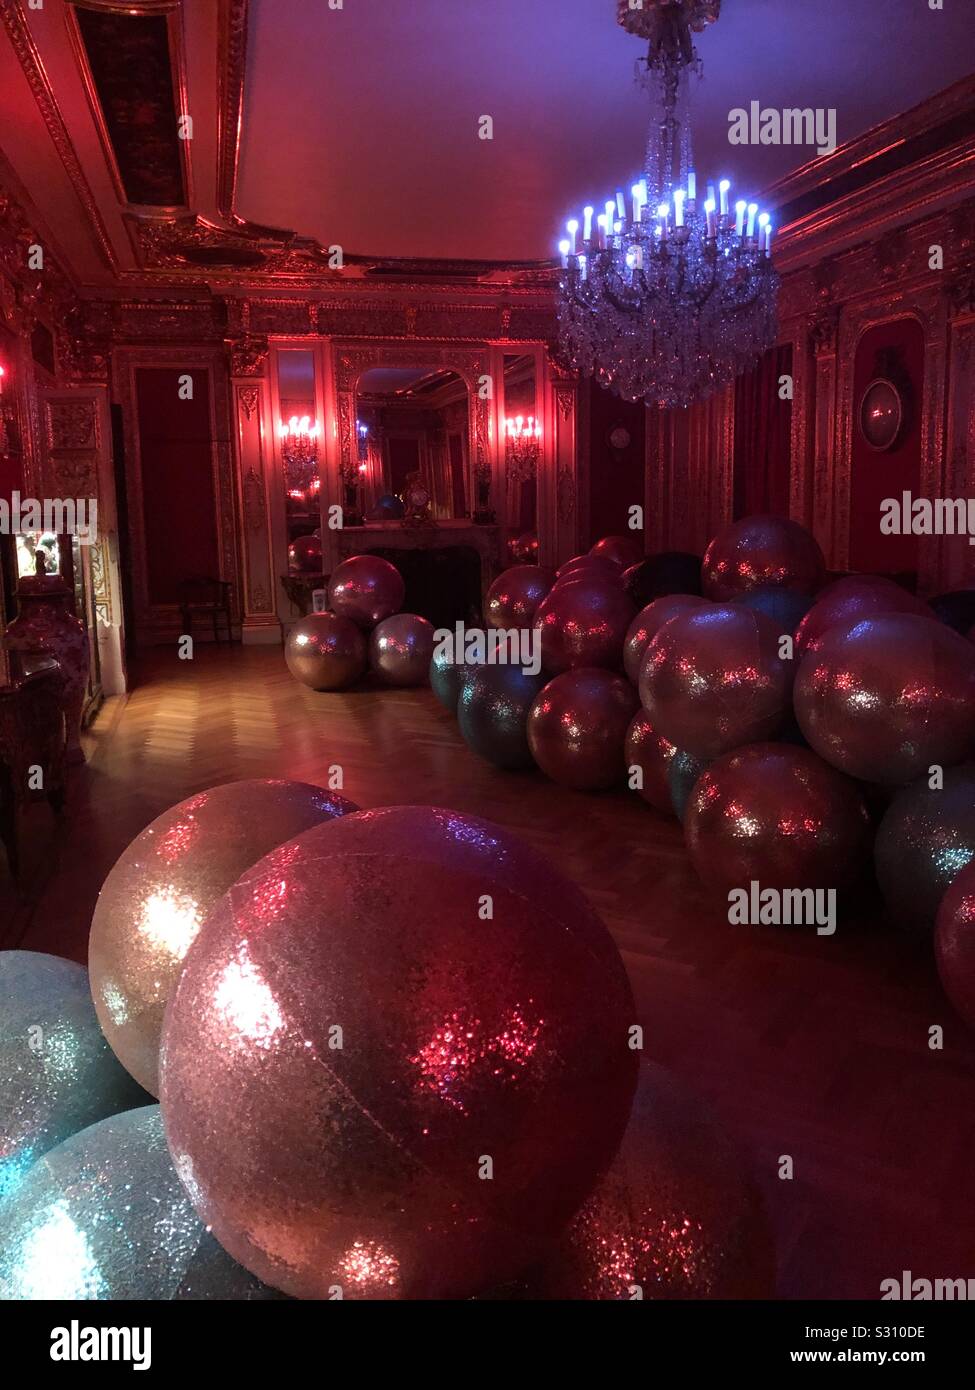 Giant glittering Decorative Christmas Baubles arranged across the floor of a salon in an English stately home in the French style at night lit by chandeliers. Stock Photo